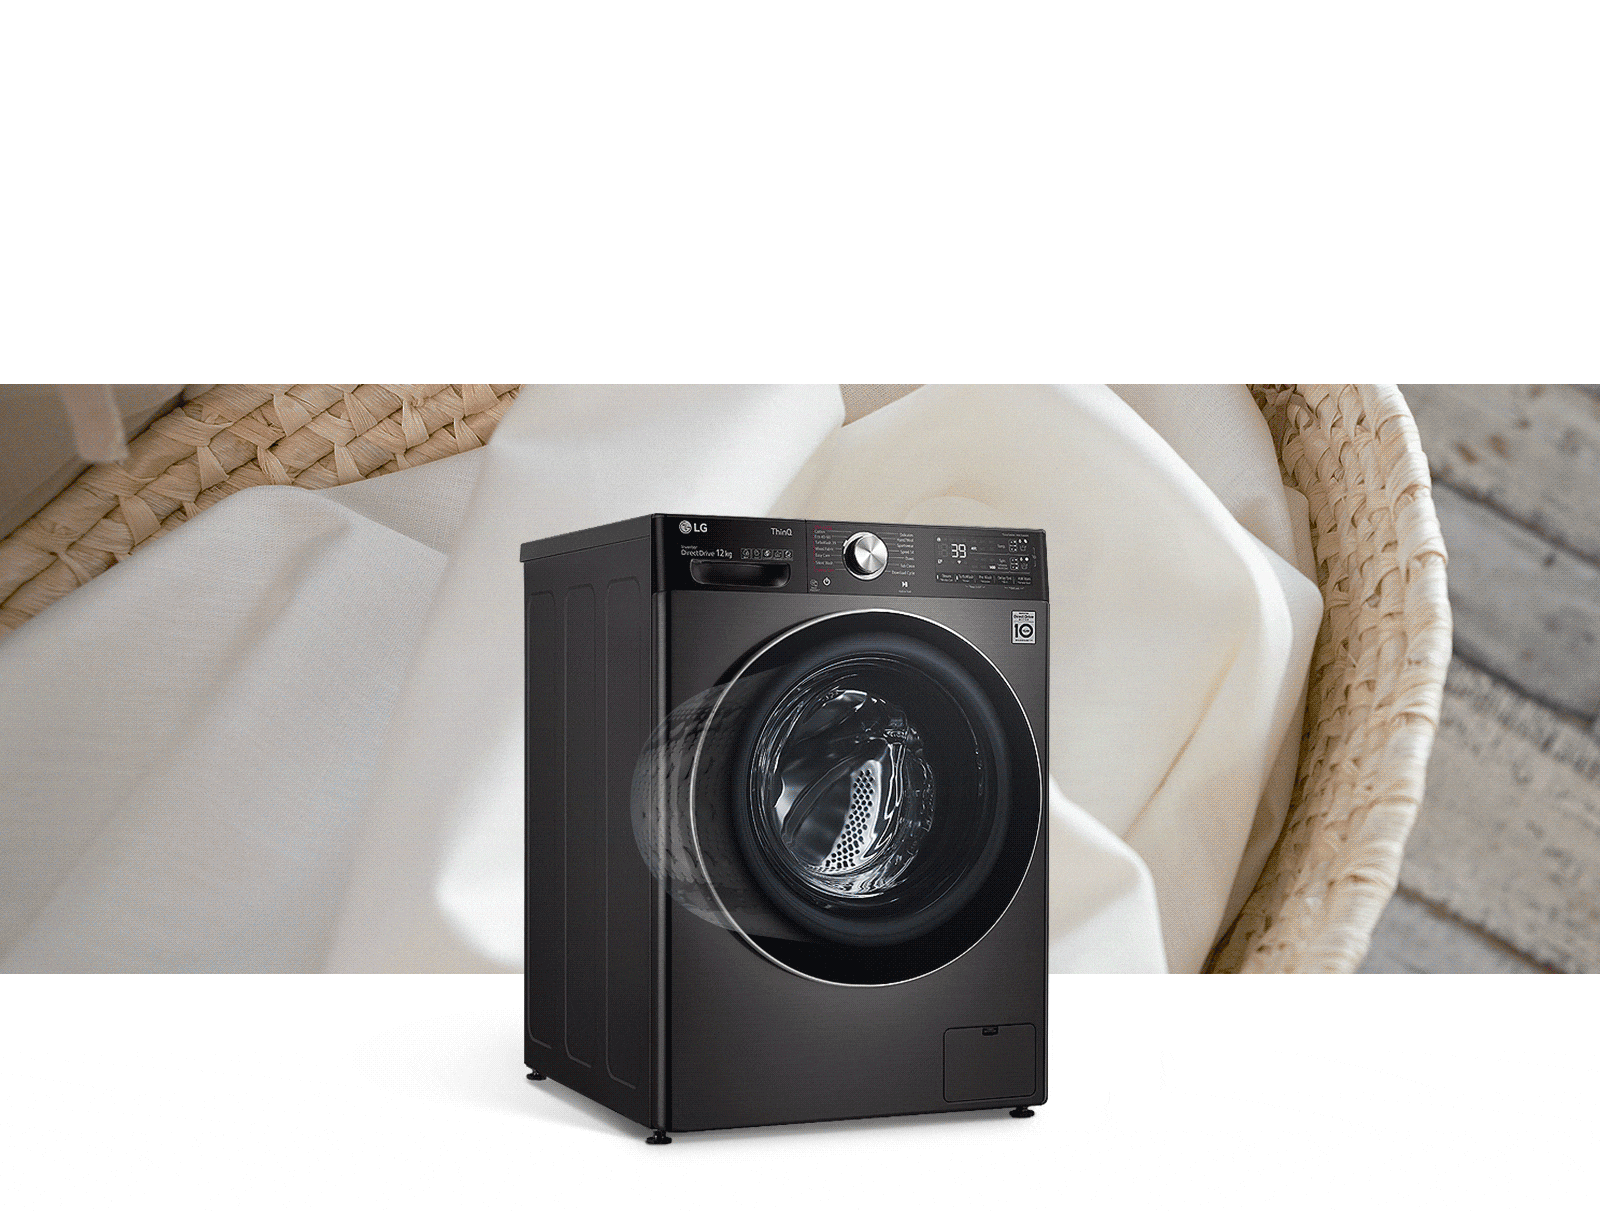 A washing machine, expressed as a large capacity, is in front of the laundry basket image.